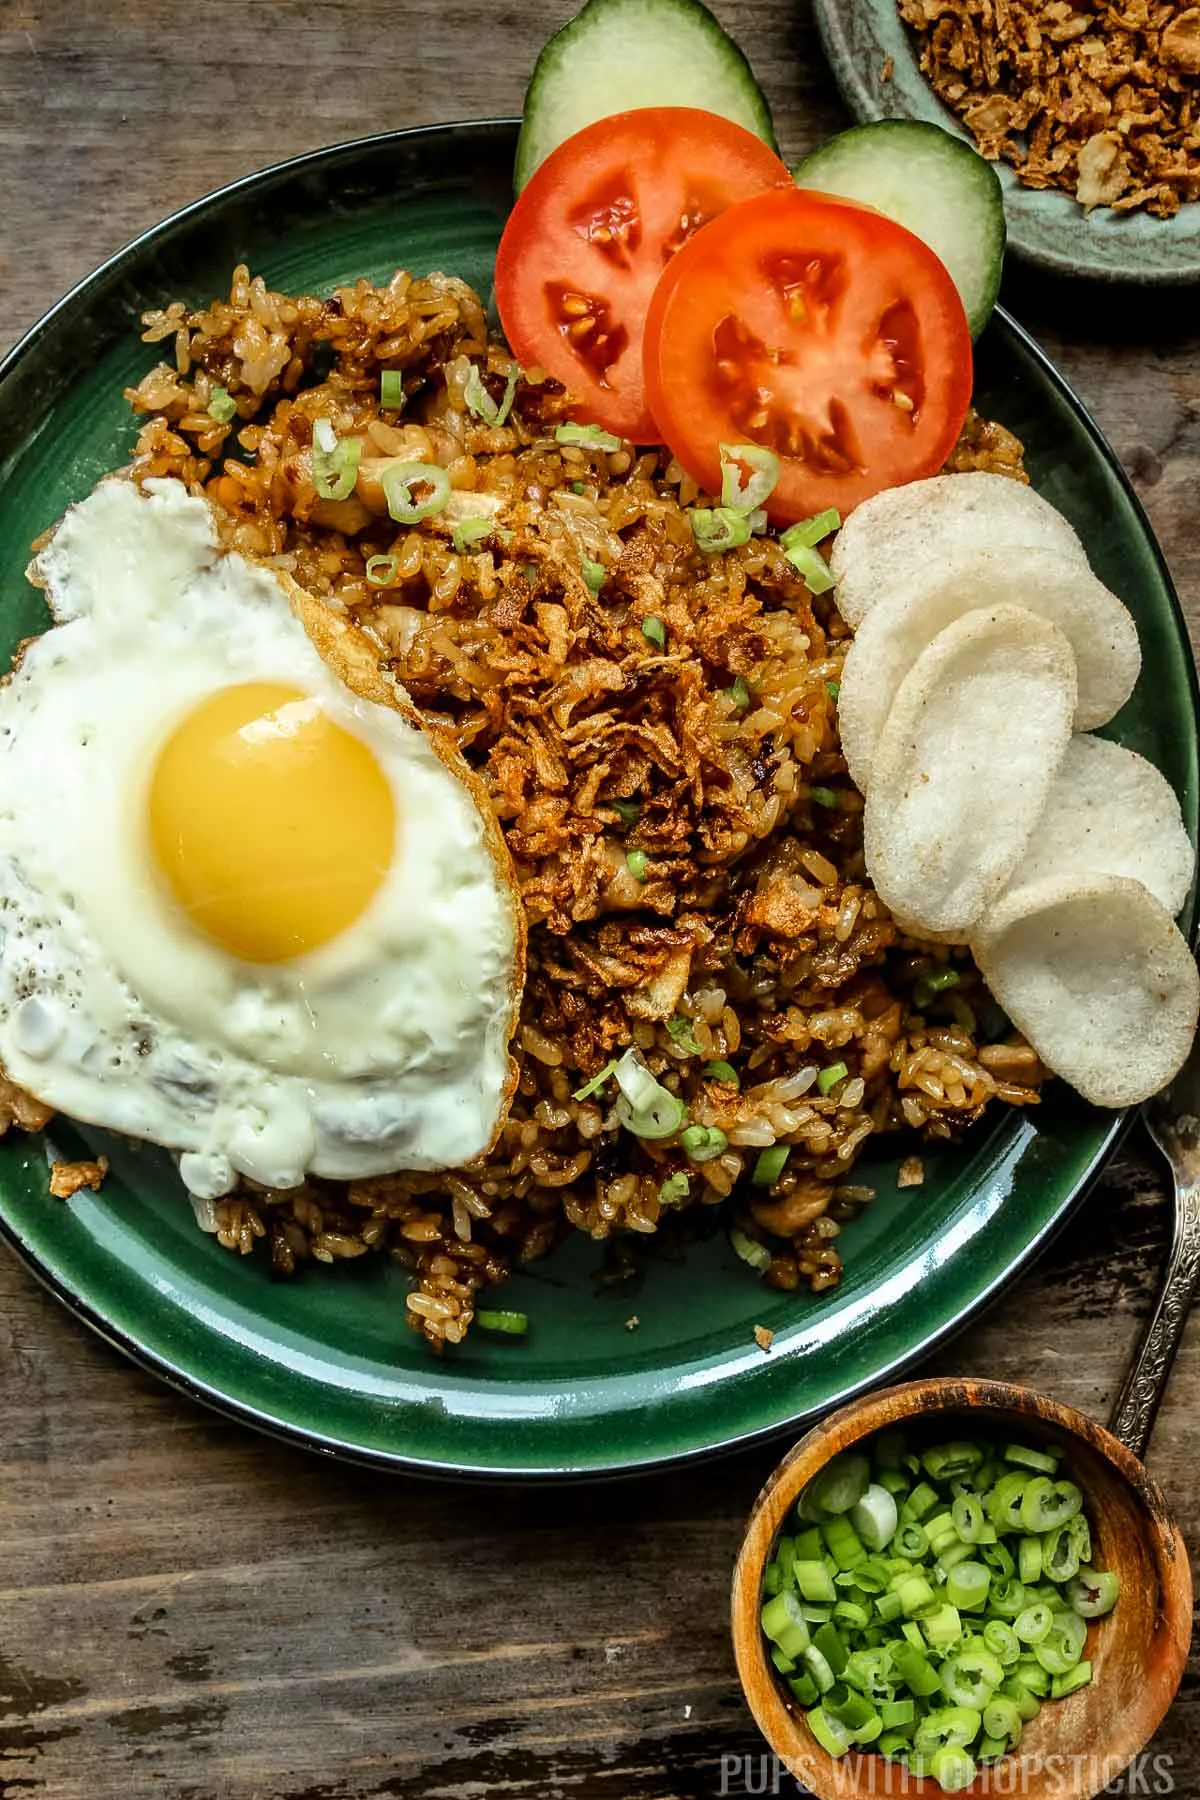 Nasi goreng (Indonesian fried rice) on a green plate with a fried egg, shrimp chips, fried shallots.